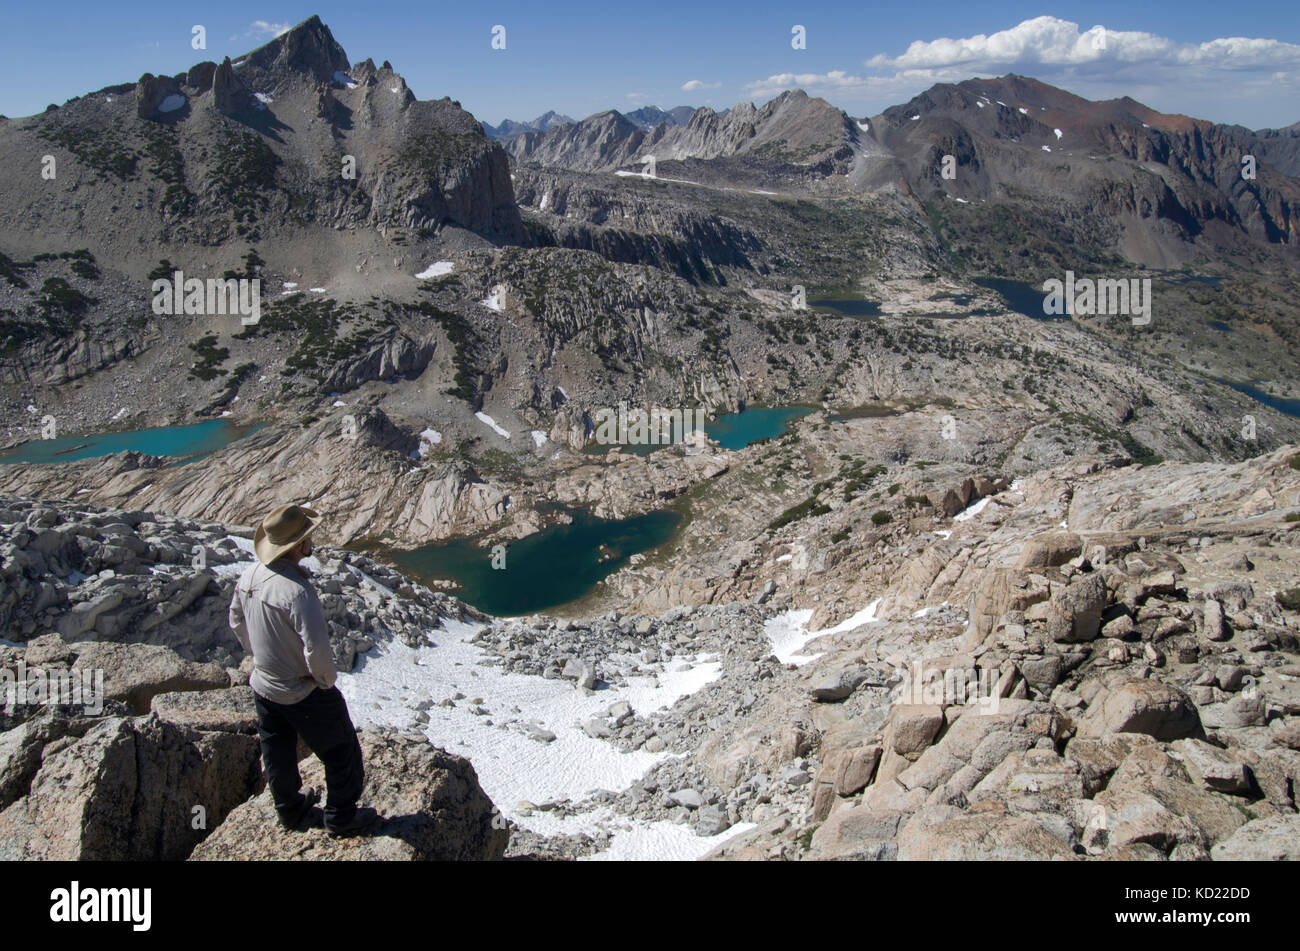 A hiker overlooks Conness Lakes and North Peak in Harvey Monroe Hall Research Natural Area along the boarder of Yosemite National Park Wilderness Stock Photo